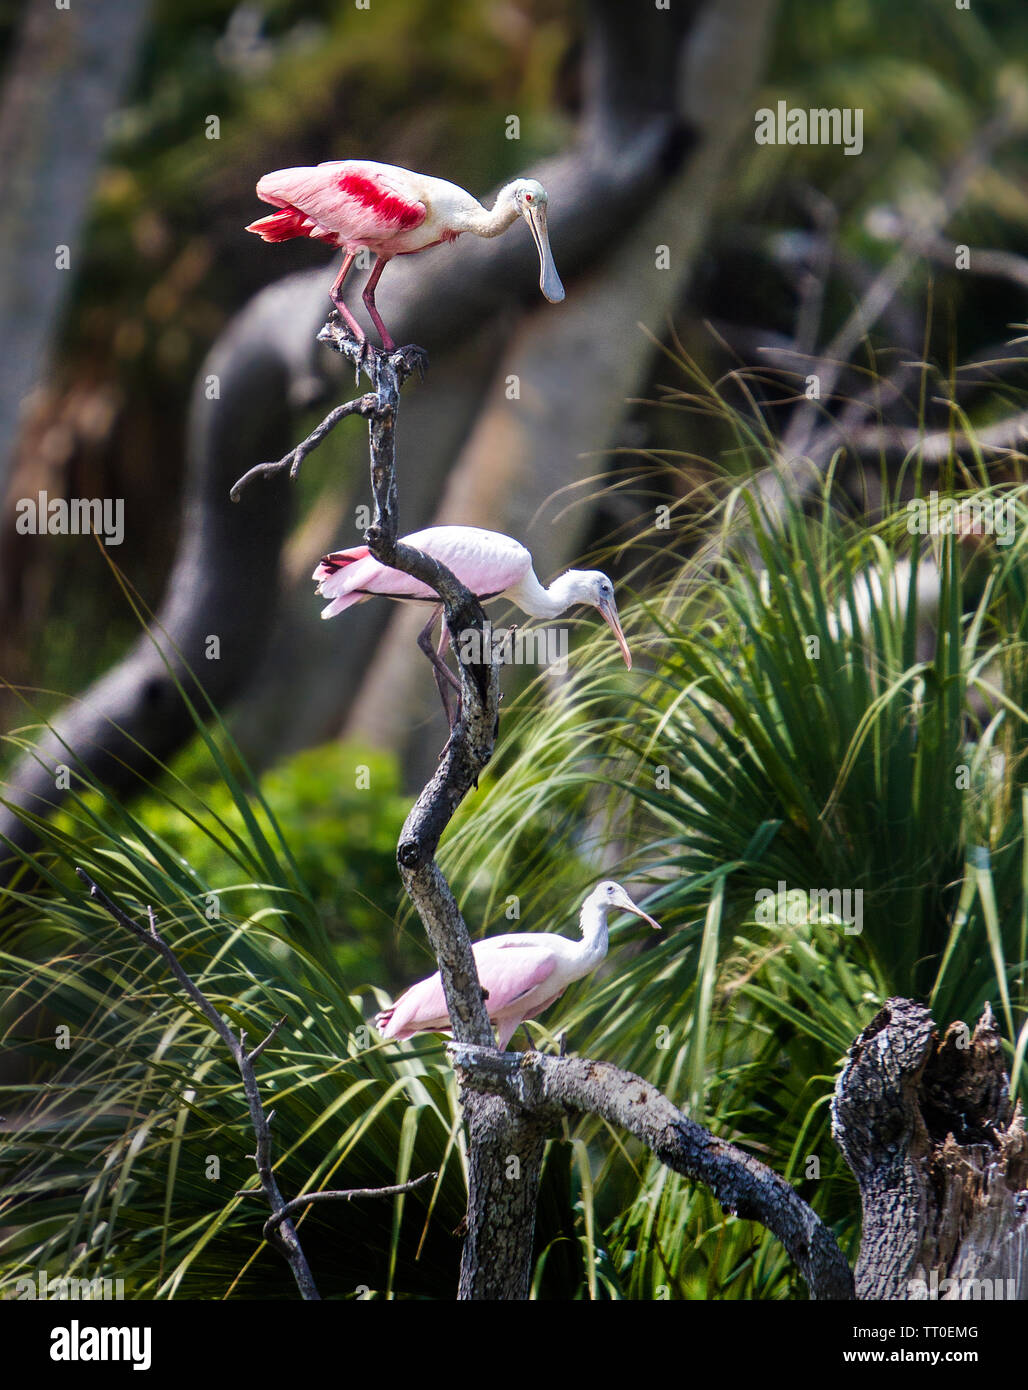 Adult Roseate Spoonbill sitting atop a branch with two immature birds sitting lower Stock Photo